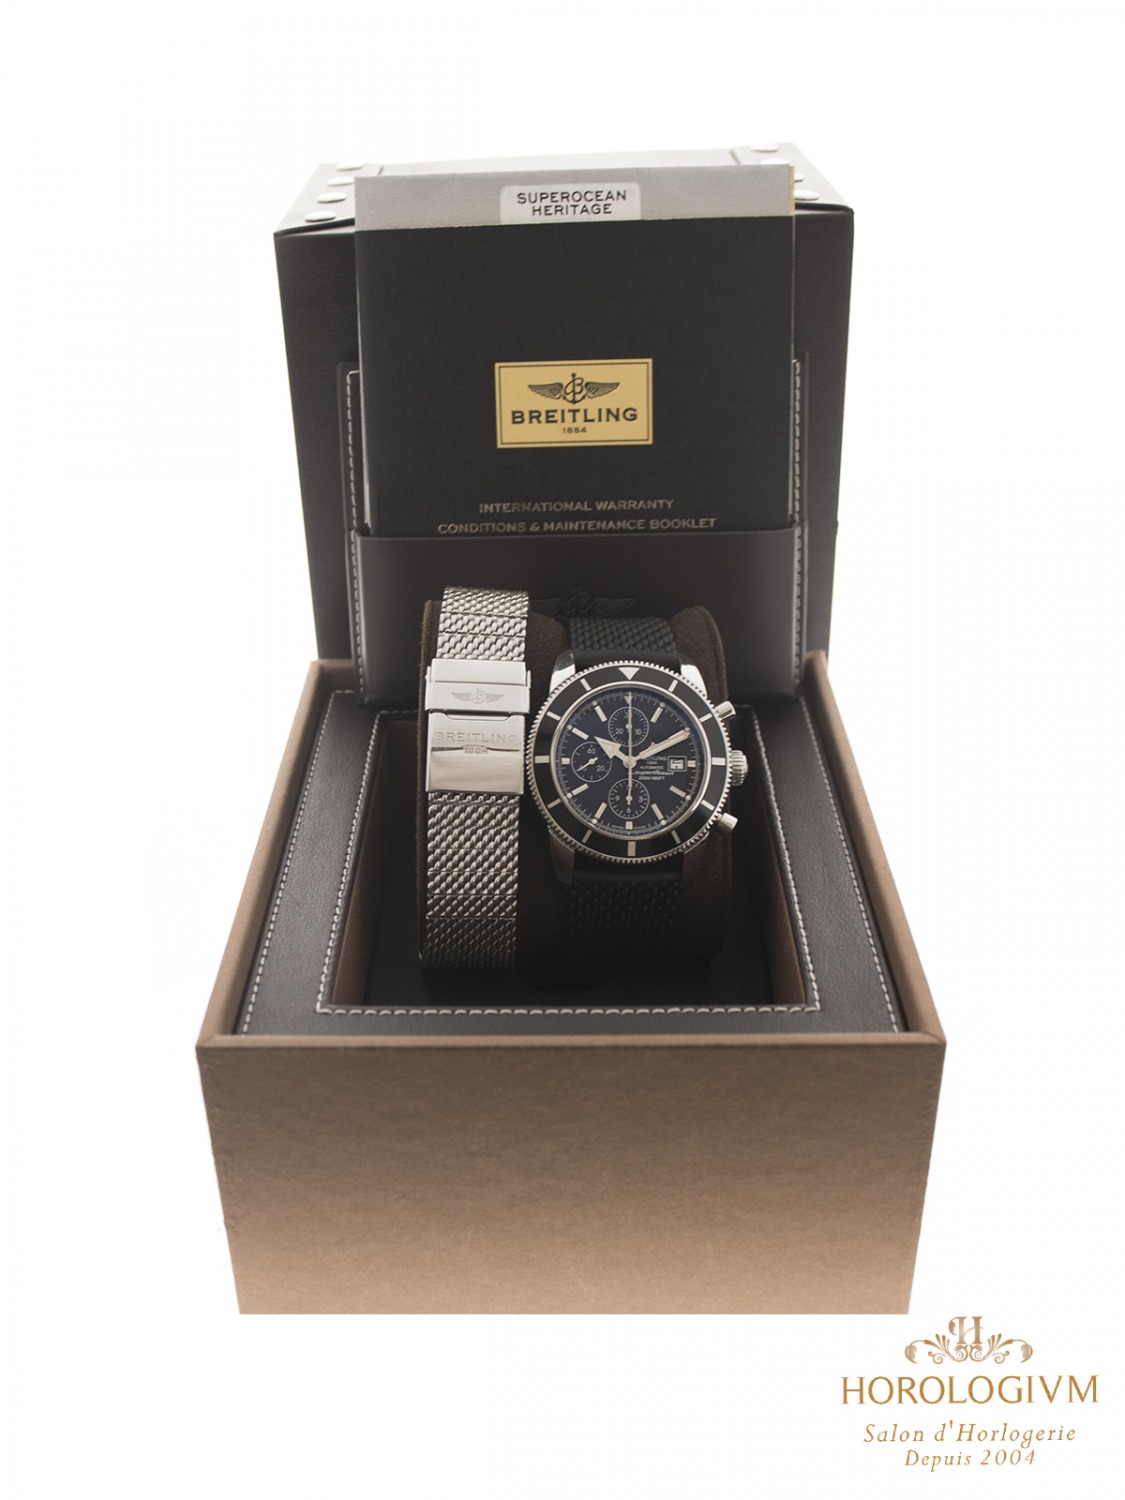 Breitling Superocean Heritage Chronograph 46 MM REF. A13320 watch, silver (case) and silver with black (bezel)